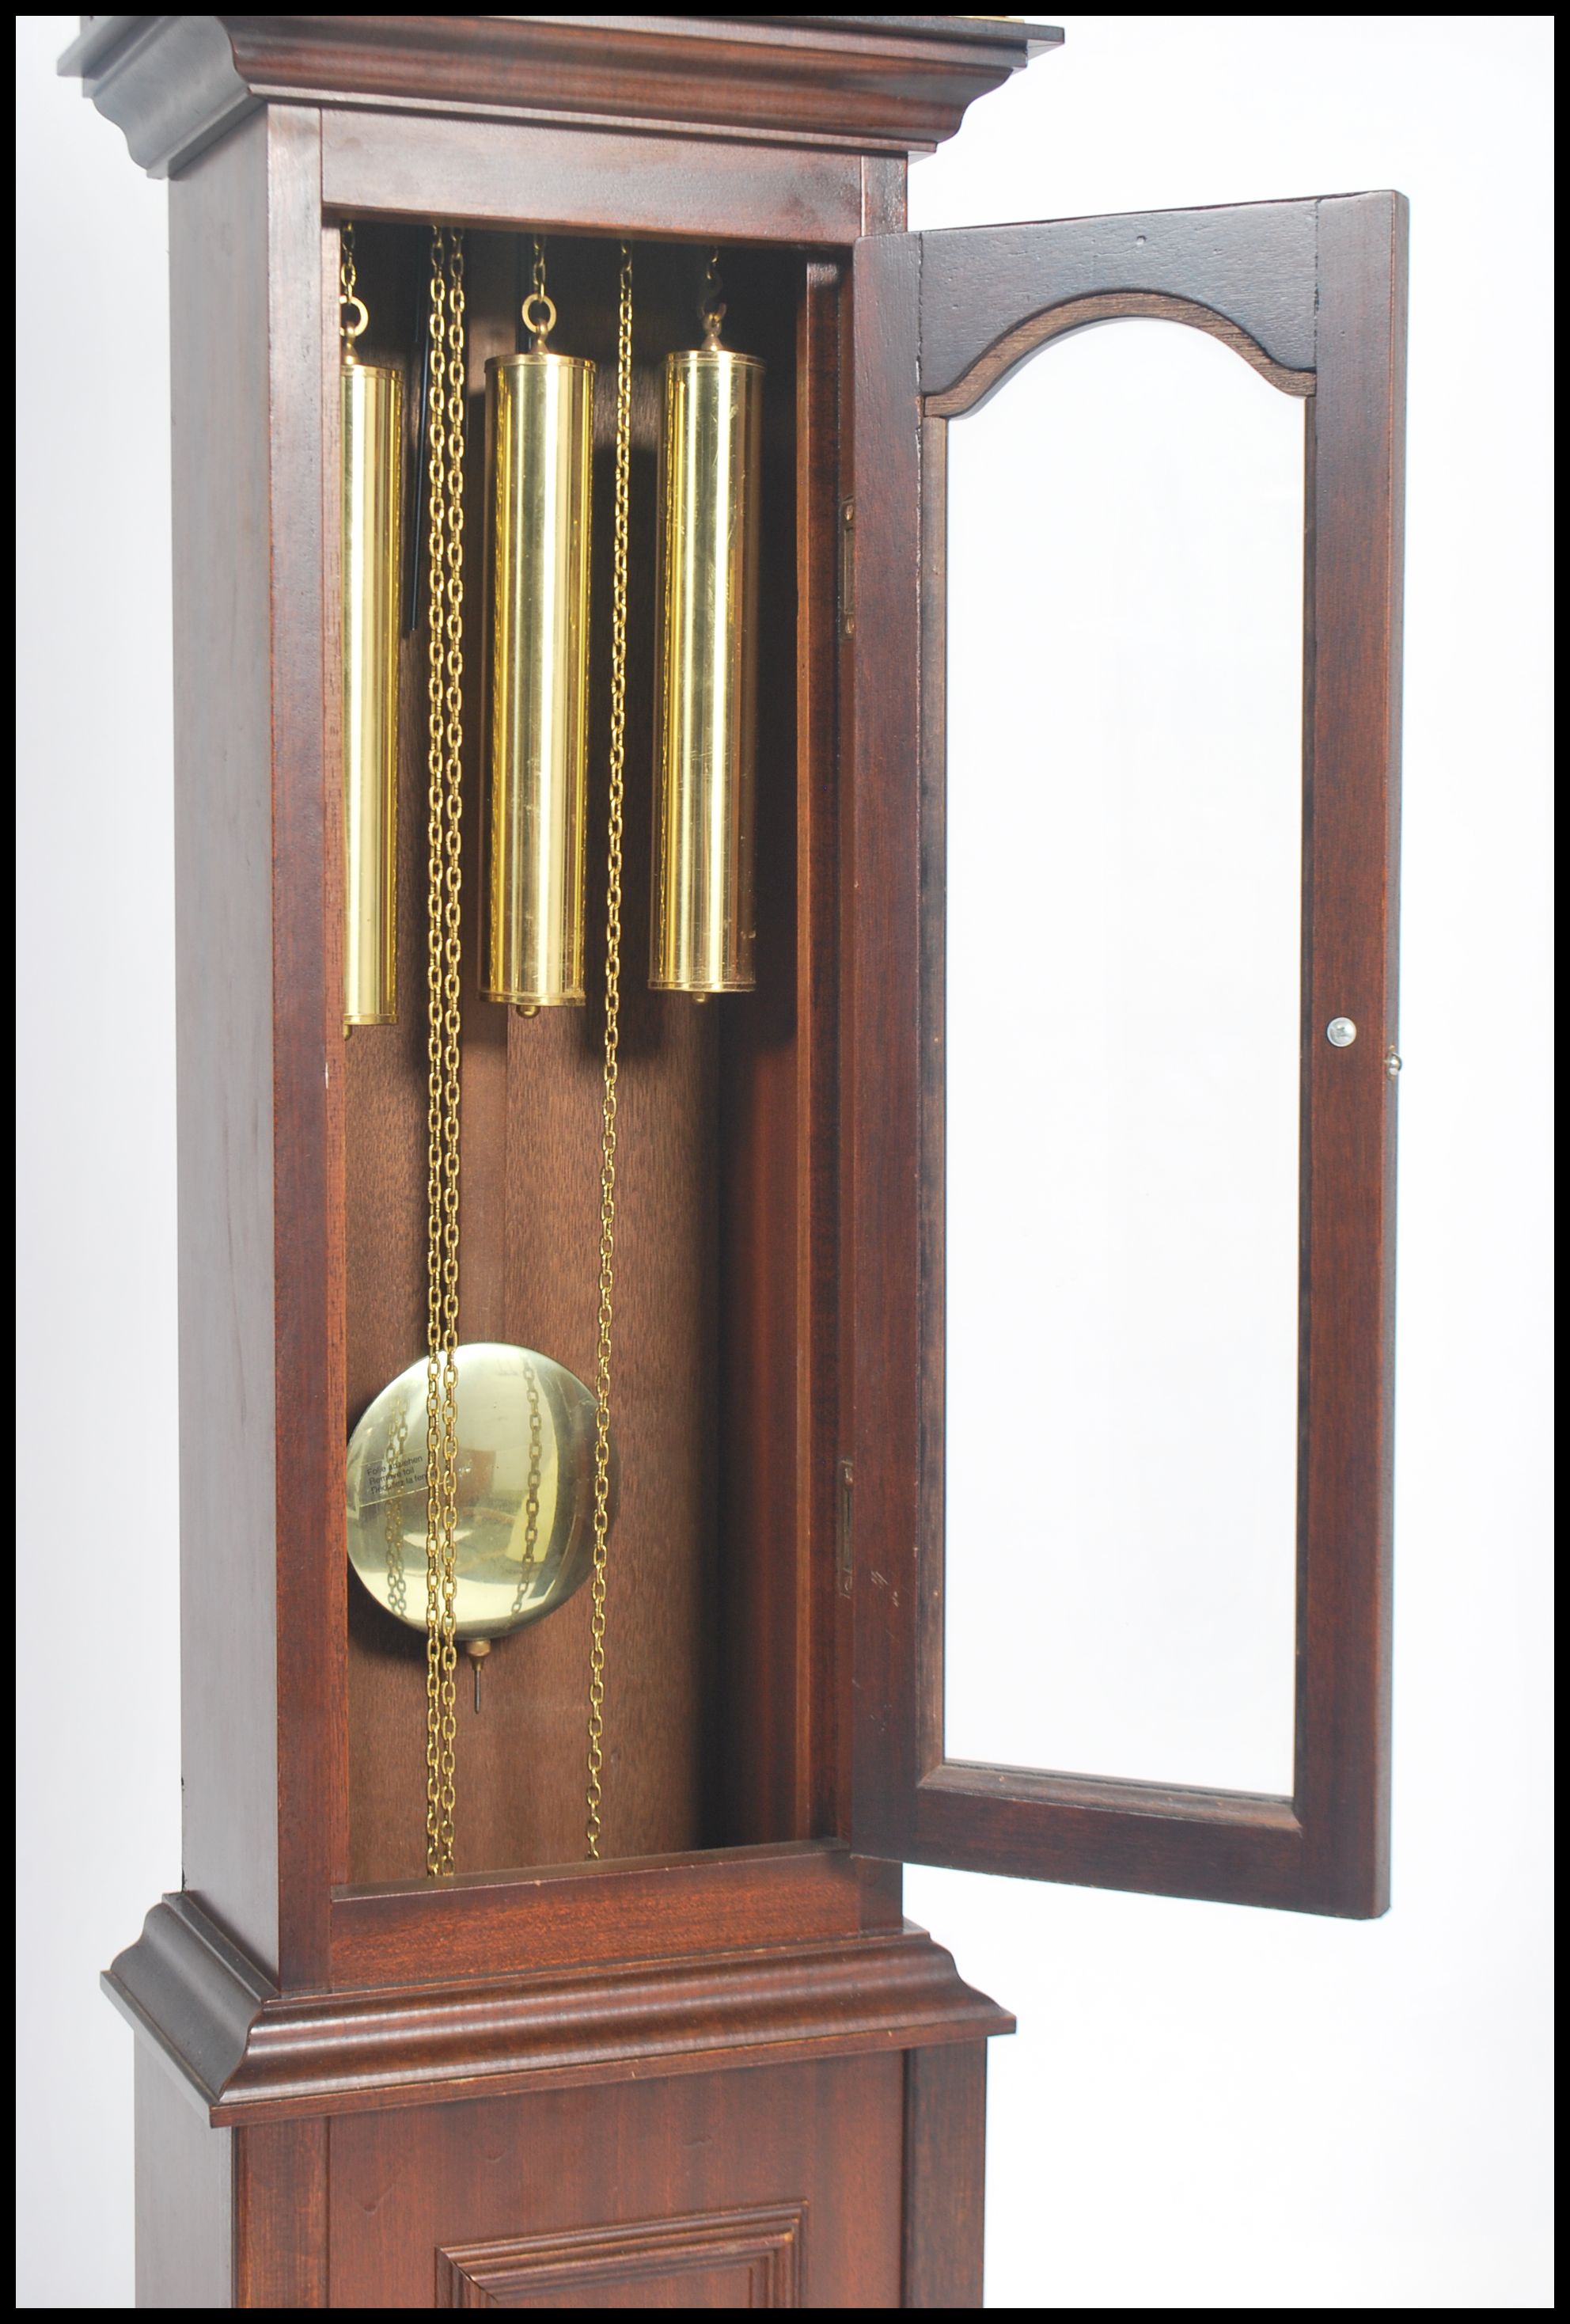 A Tempus Fugit grandmother clock with mahogany case and hood having inset brass and silvered dial - Image 4 of 4